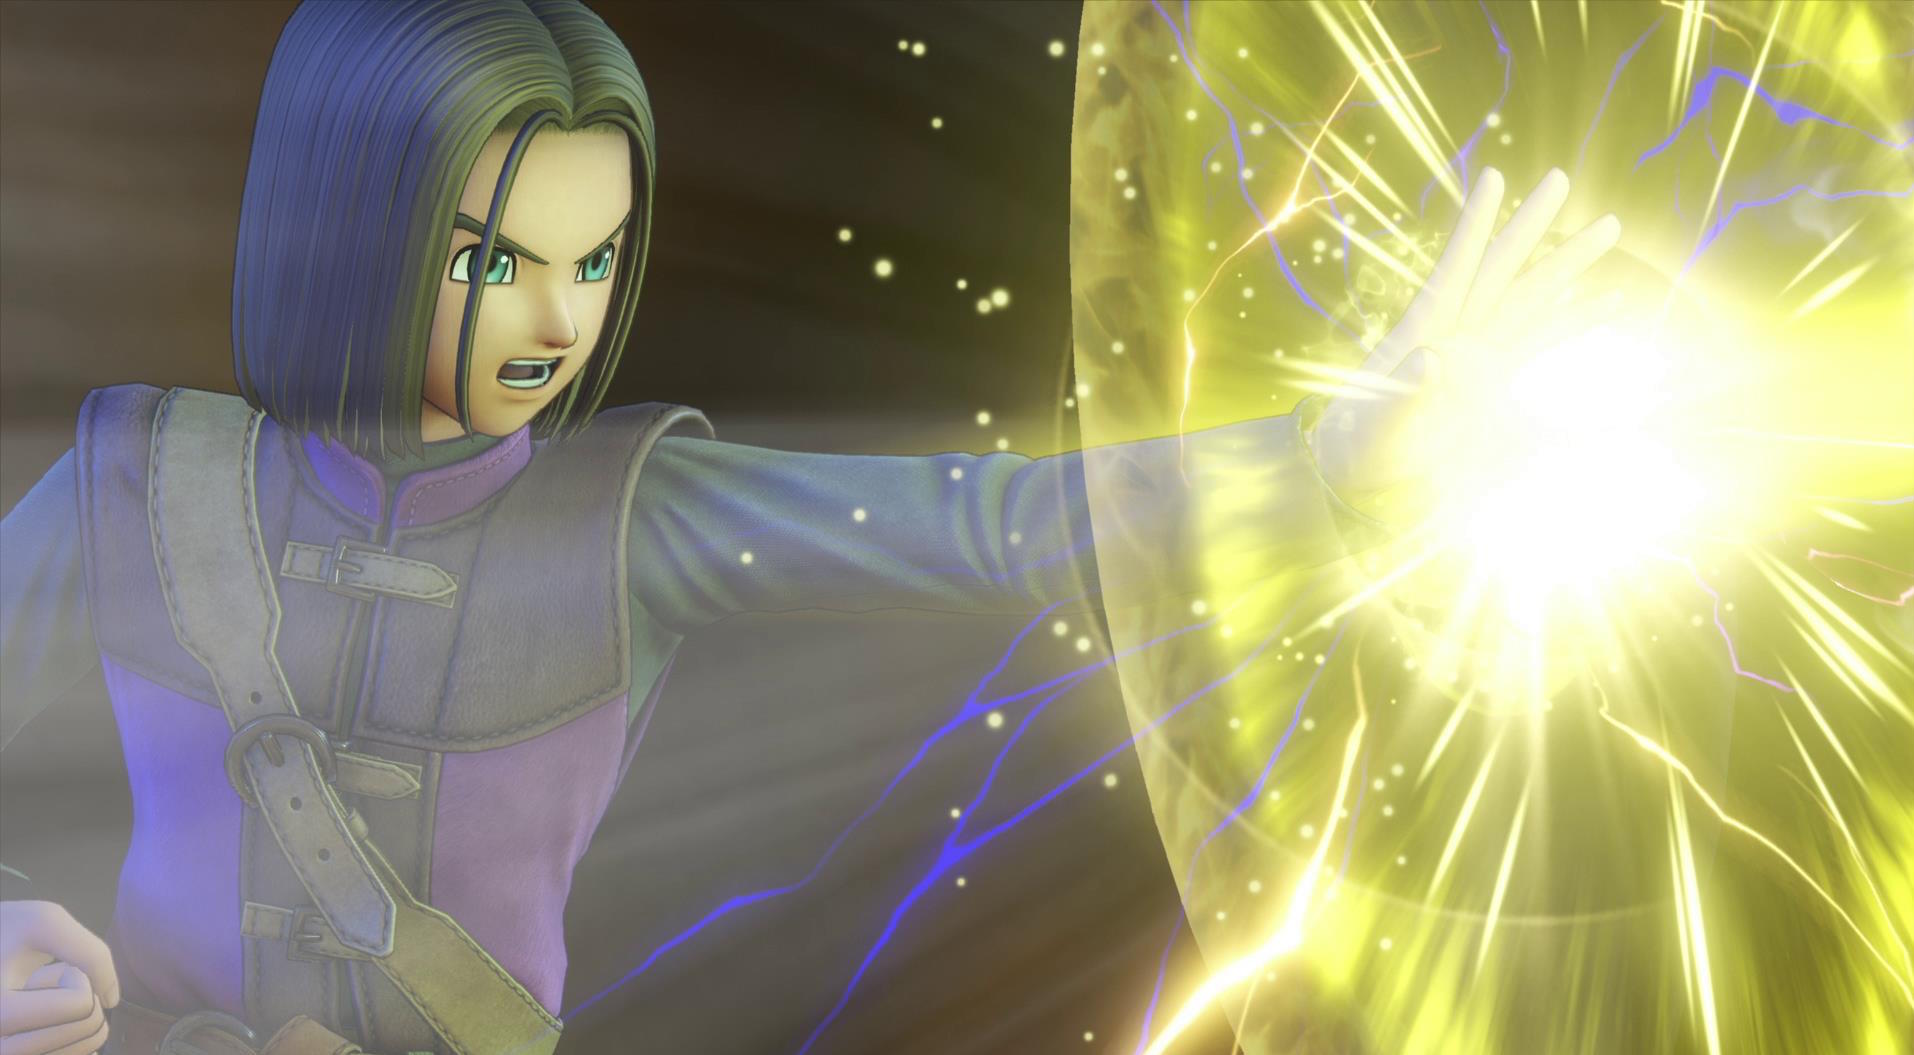 Dragon Quest XI: Echoes of an Elusive Age Review: Oozing with character